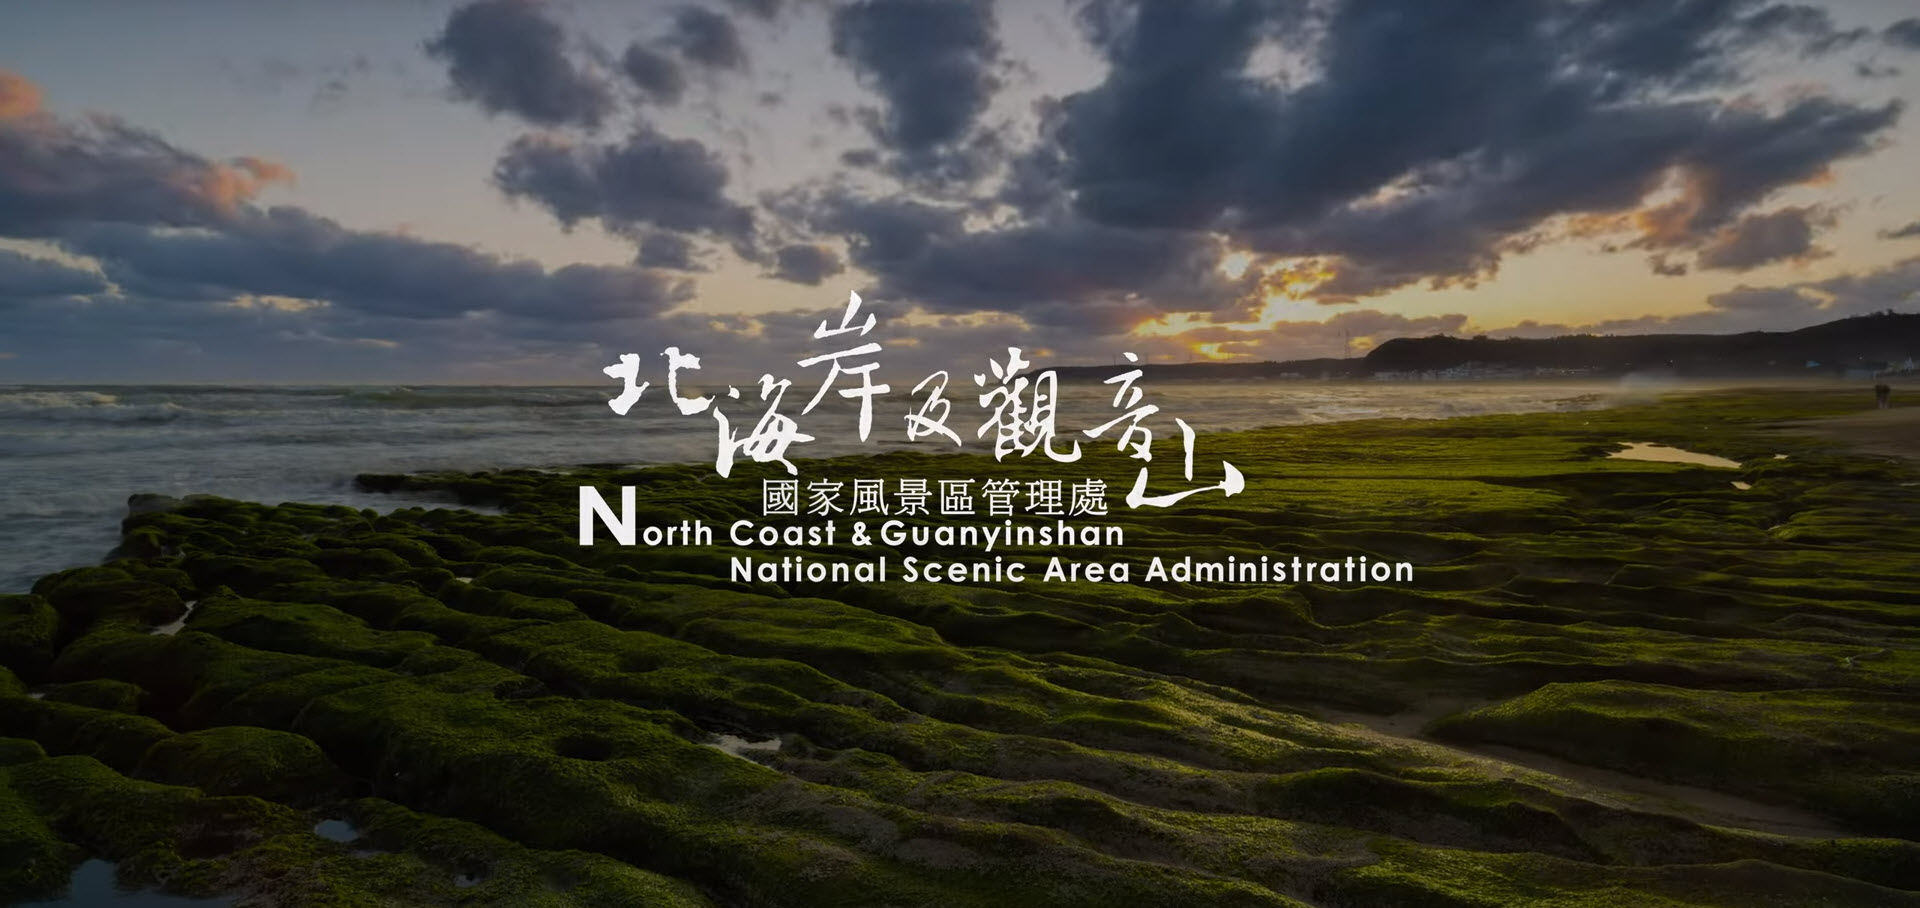 North Coast & Guanyinshan National Scenic Area - 8minutes